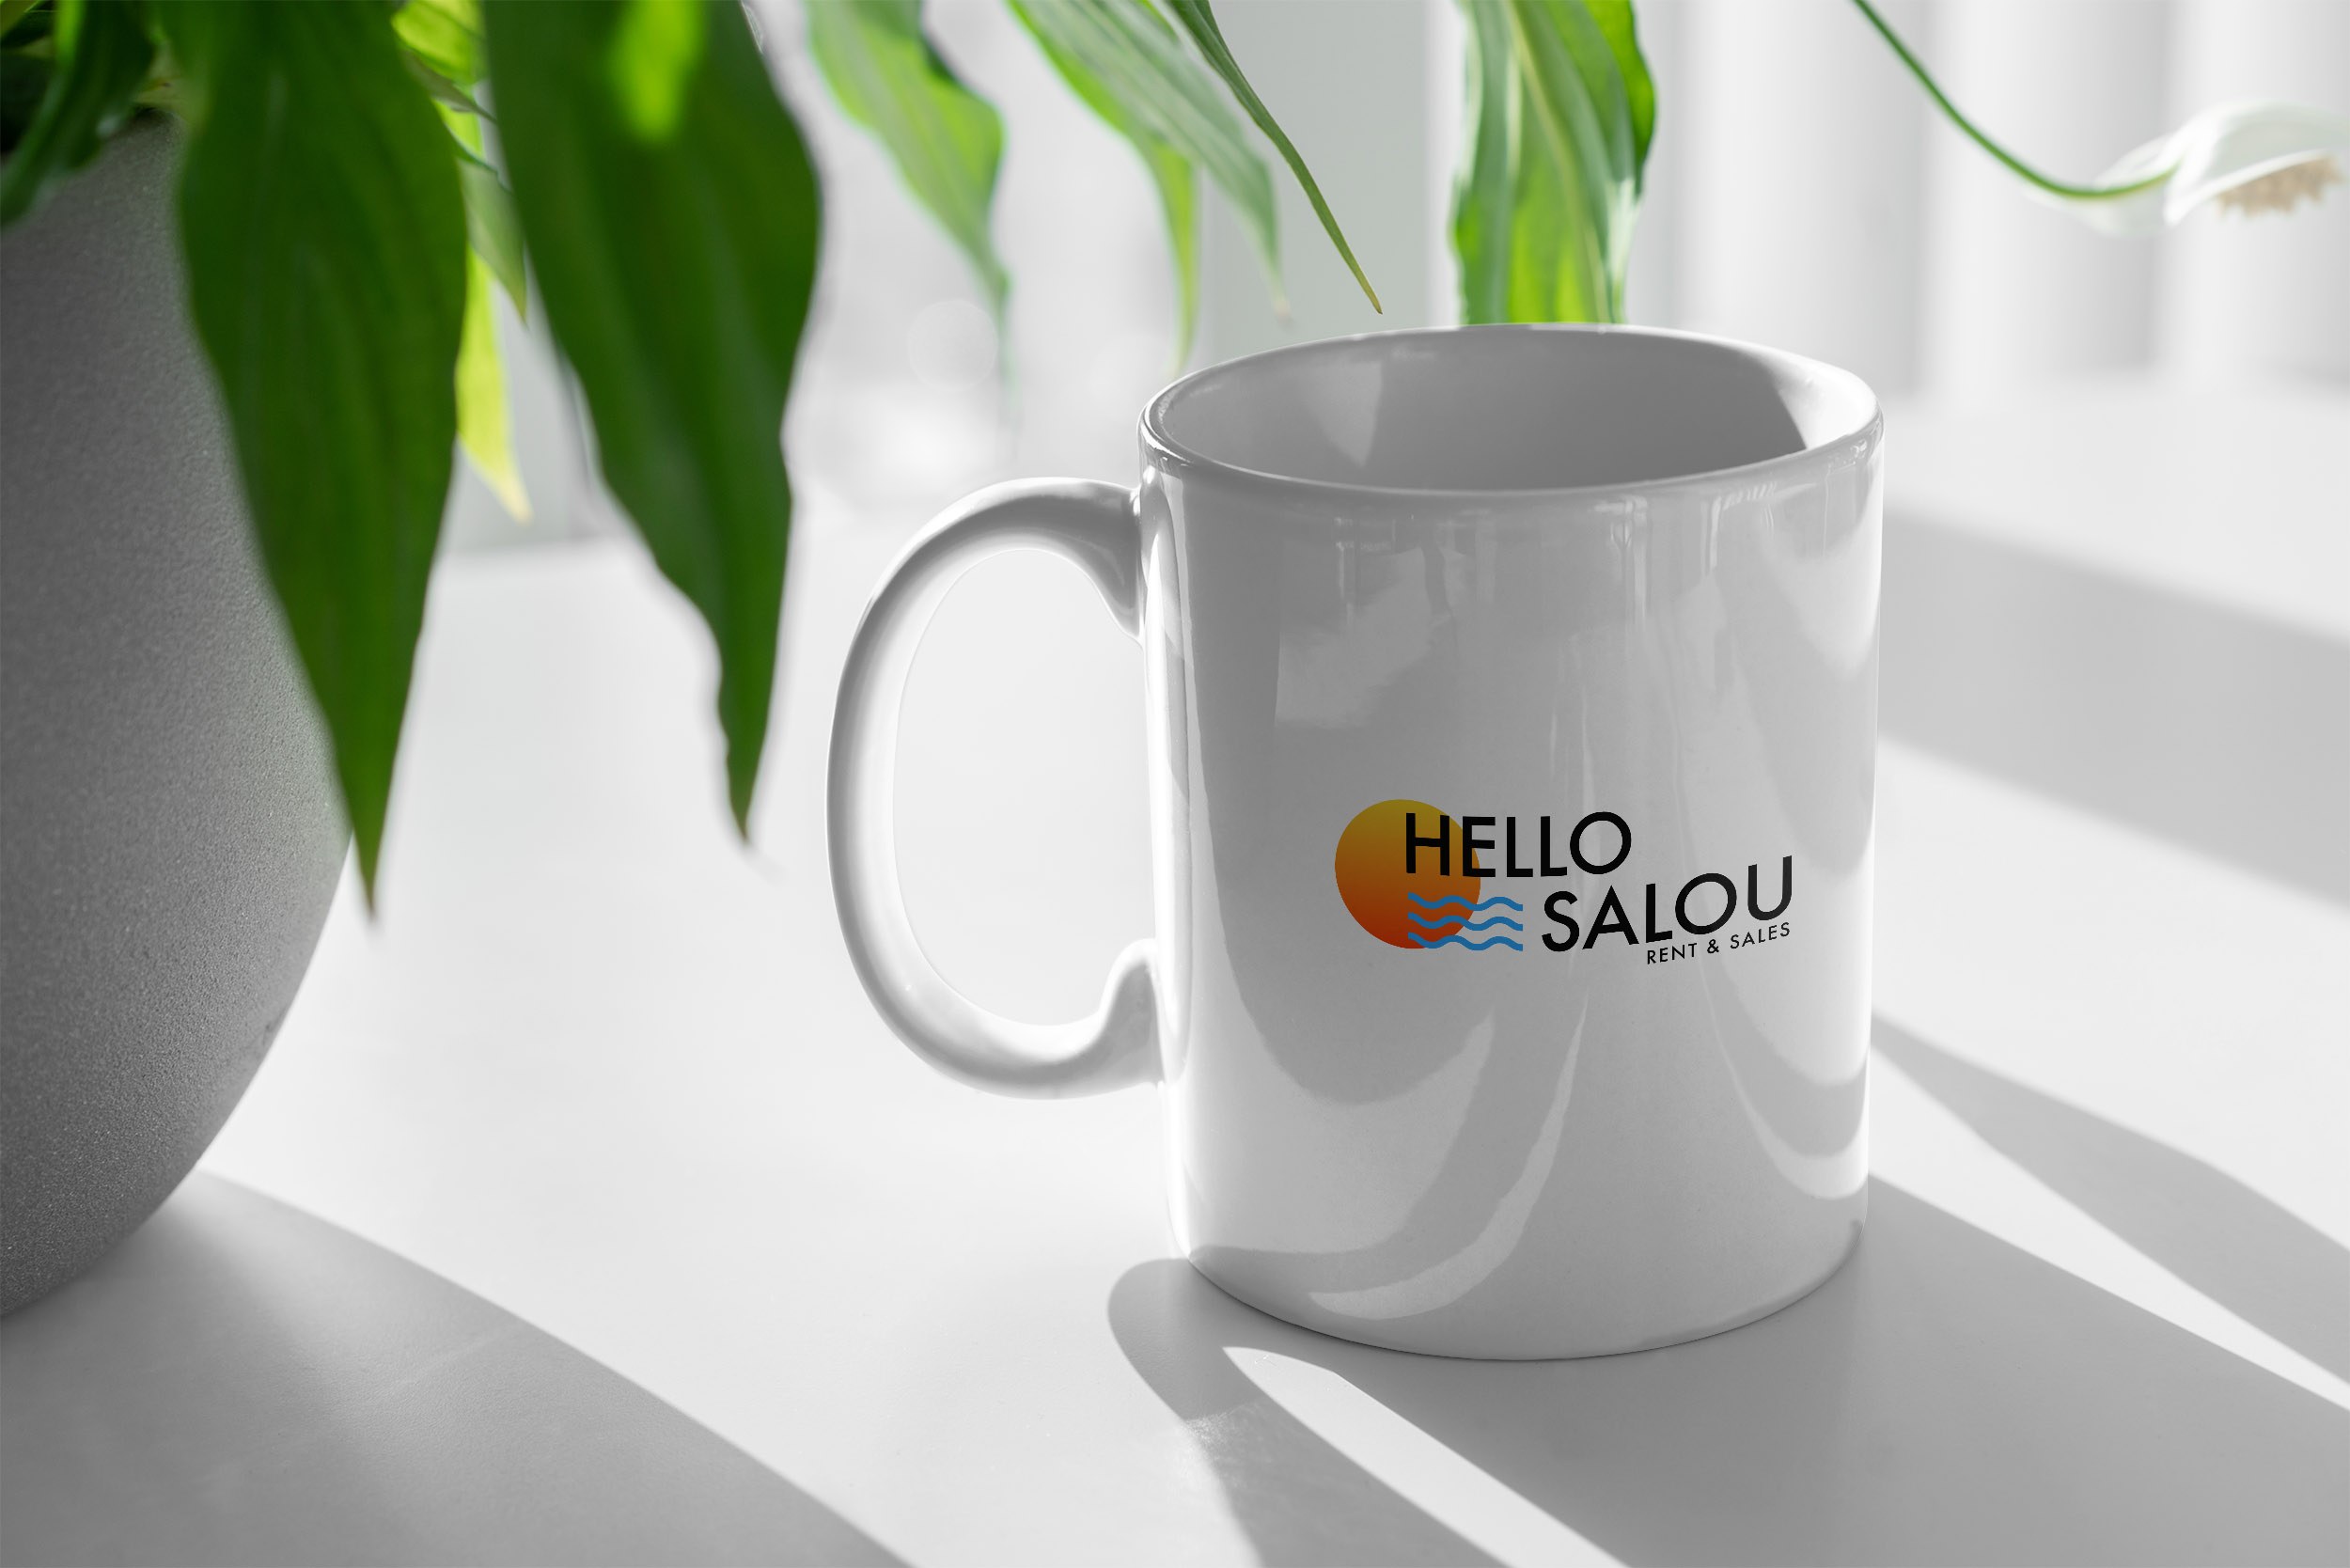 Branding and website for real estate agency Hello Salou